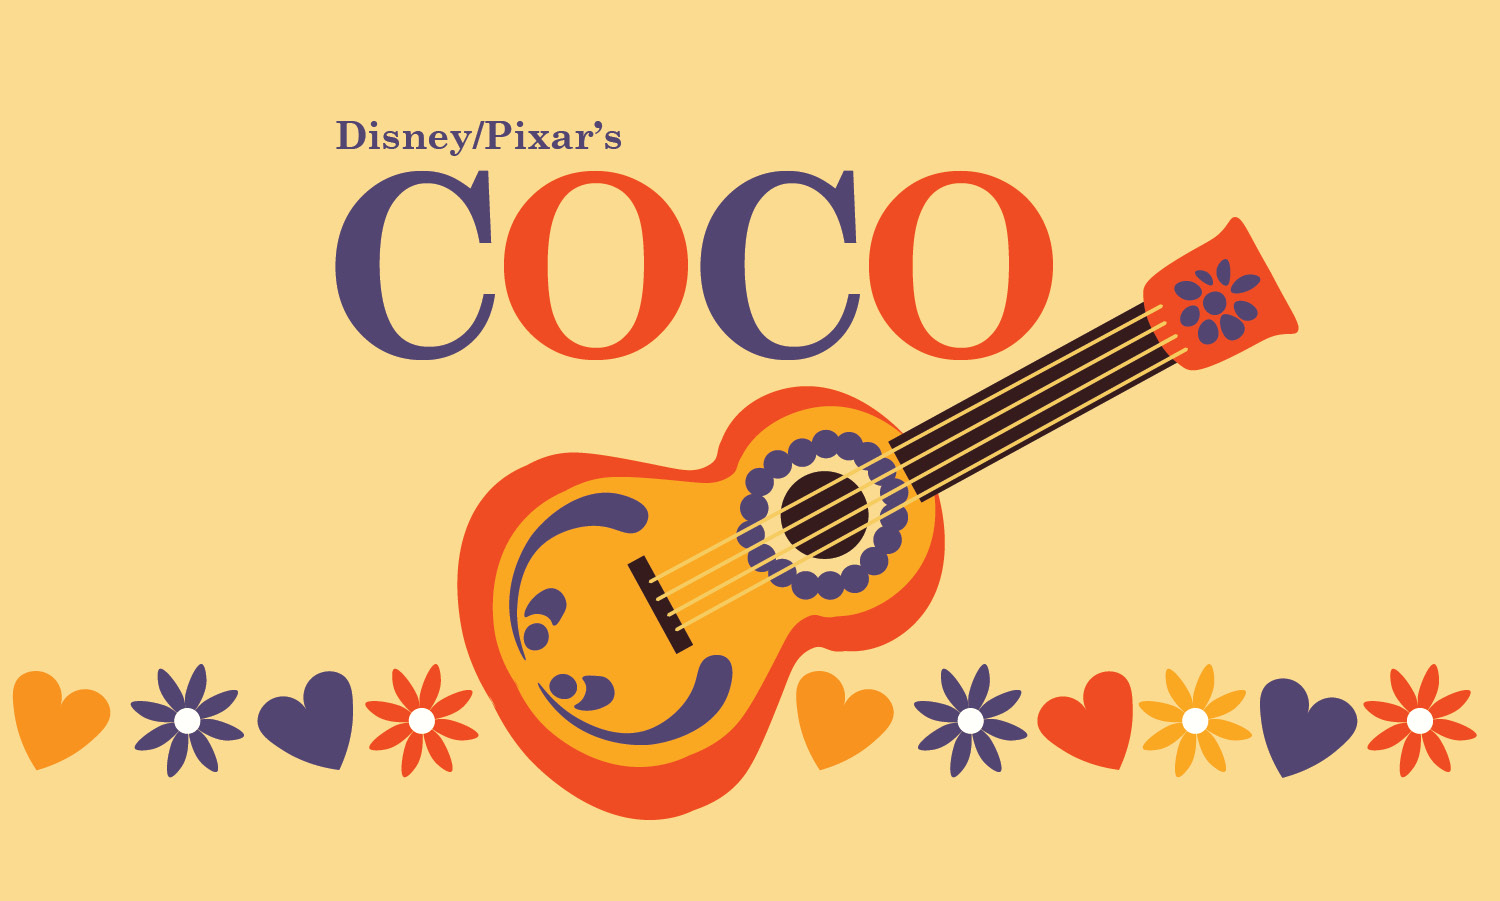 Ad for Movie Under the Stars. Headline text: Disney/Pixar's Coco. Illustration of a guitar in the center of the image. Border along the bottom of the image are illustrations of flowers and hearts.